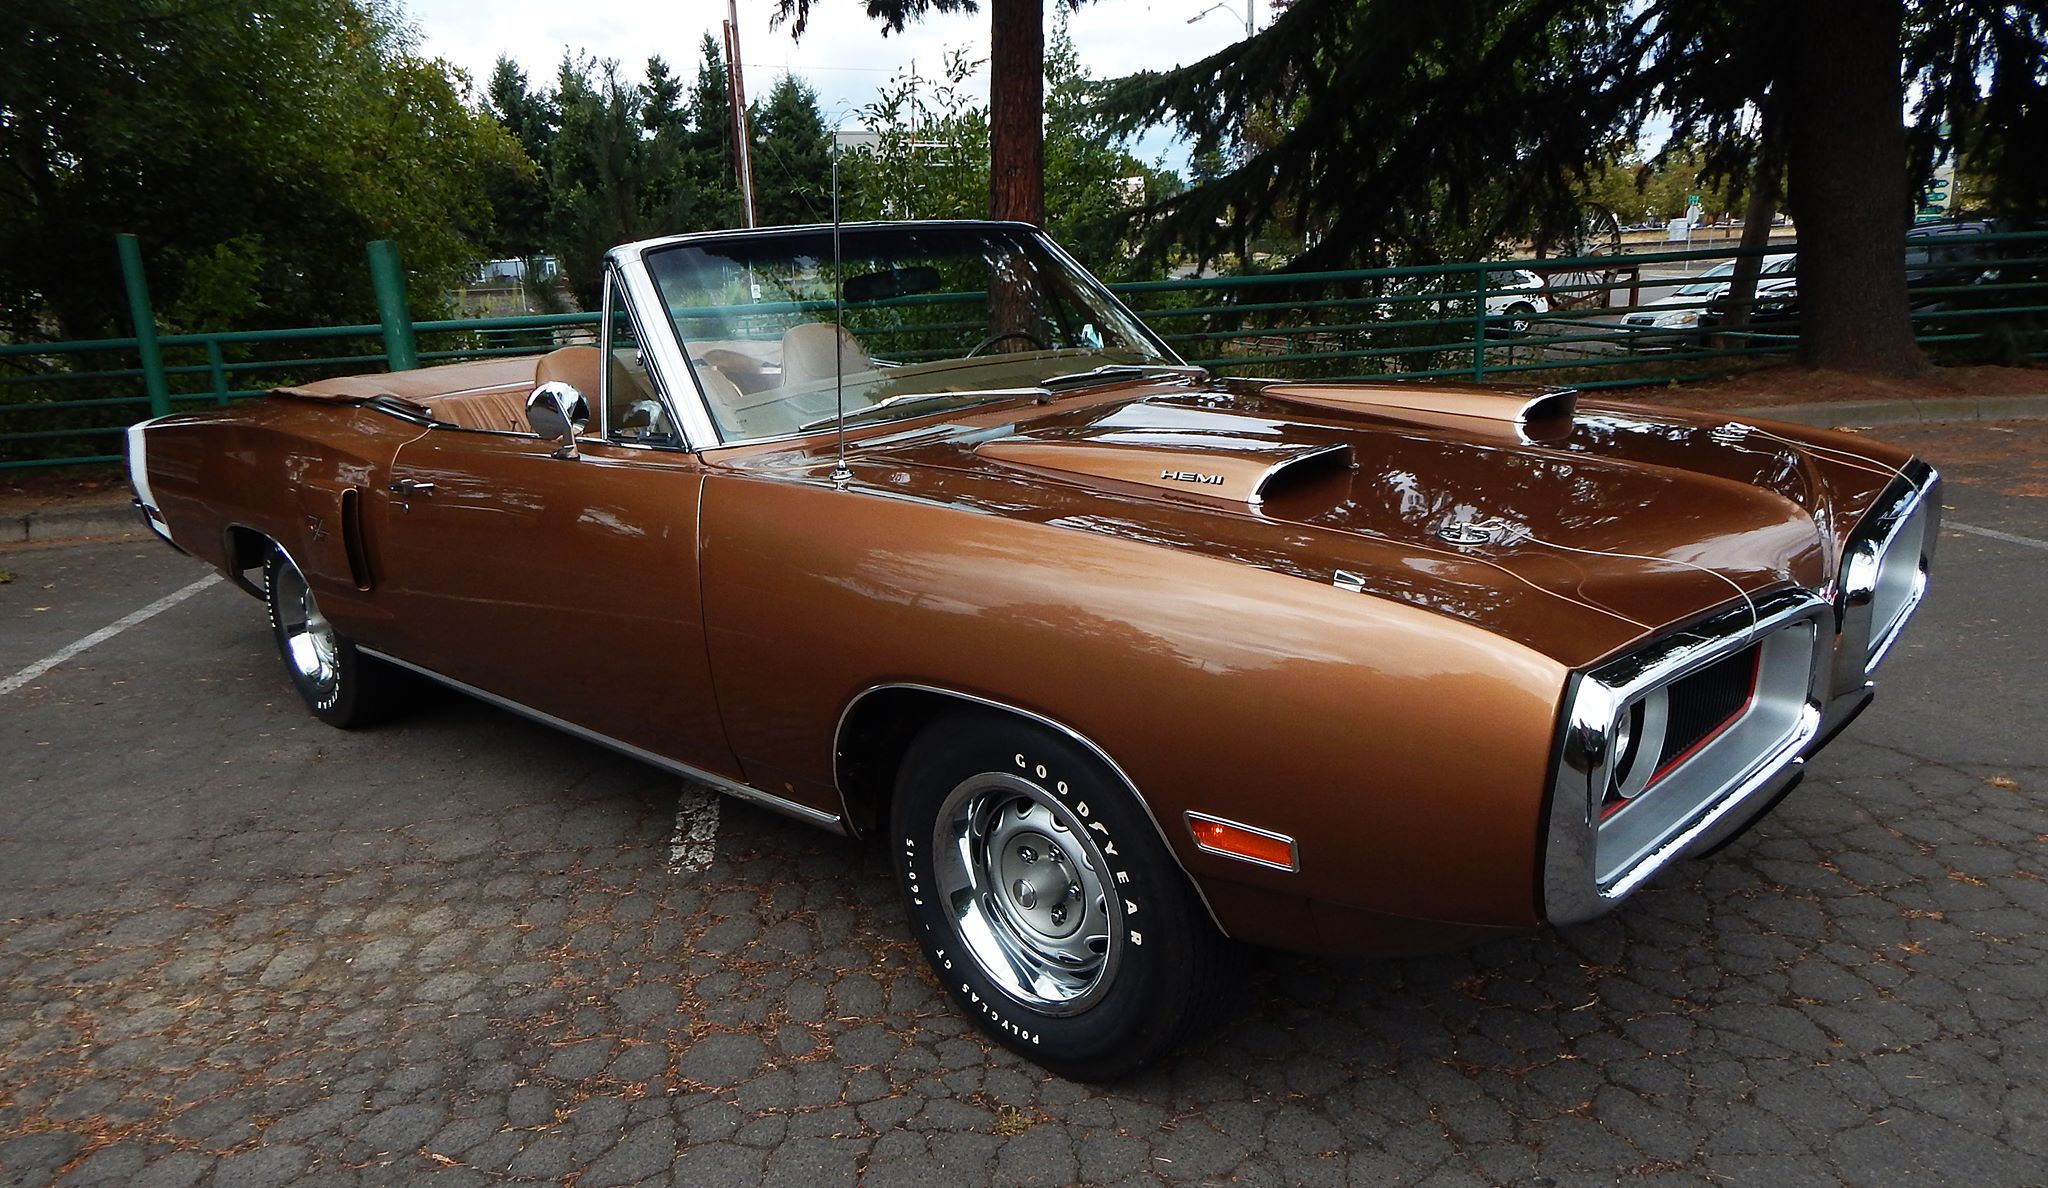 1970 Dodge only built 2 Coronet R/T Convertible's